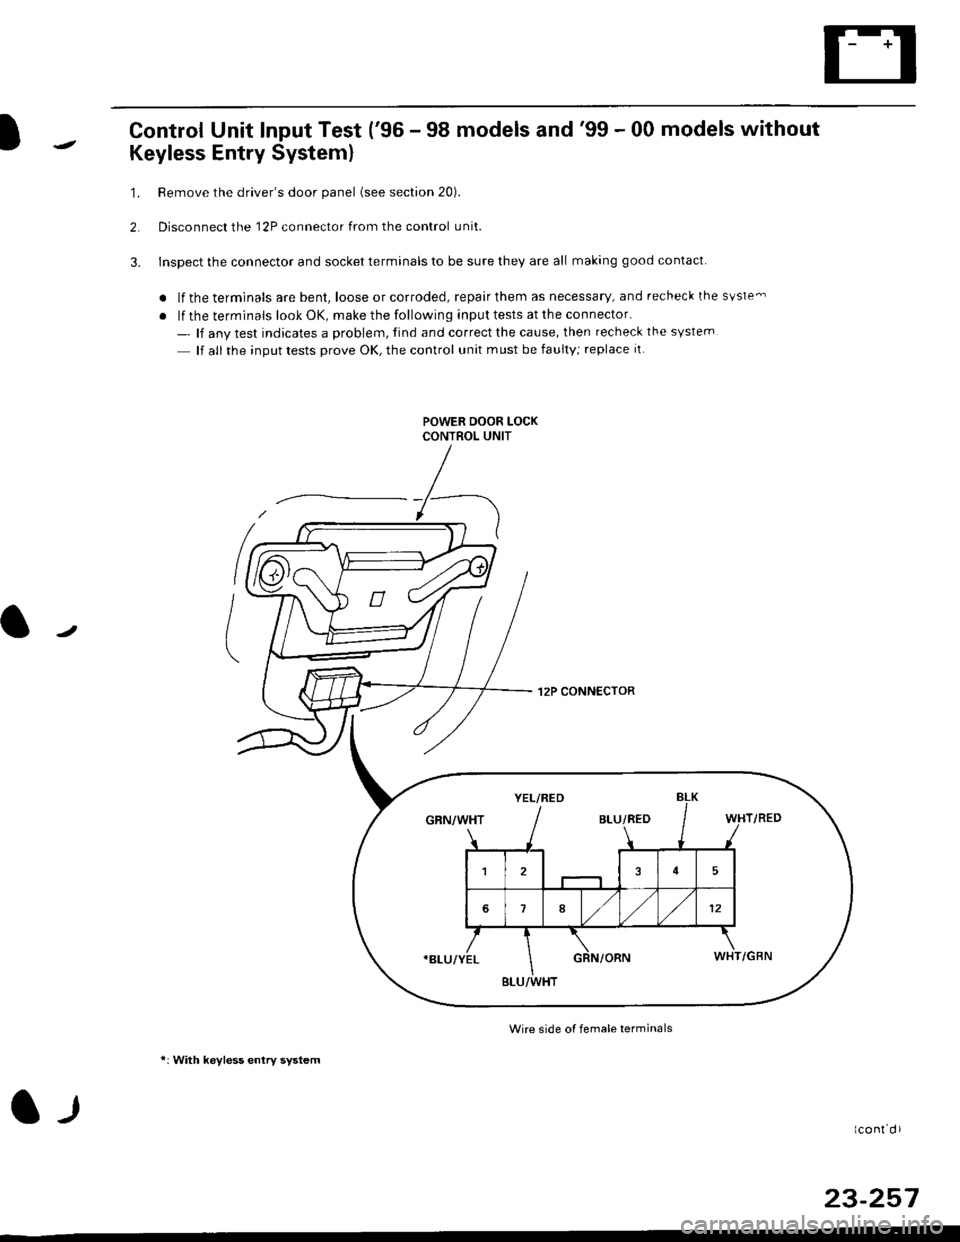 HONDA CIVIC 1997 6.G Workshop Manual Control Unit Input Test (96 - 98 models and99 - 00 models without
Keyless Entry System)
1. Remove the drivers door panel (see section 20).
2. Disconnect the 12P connector from the control unit.
3. 